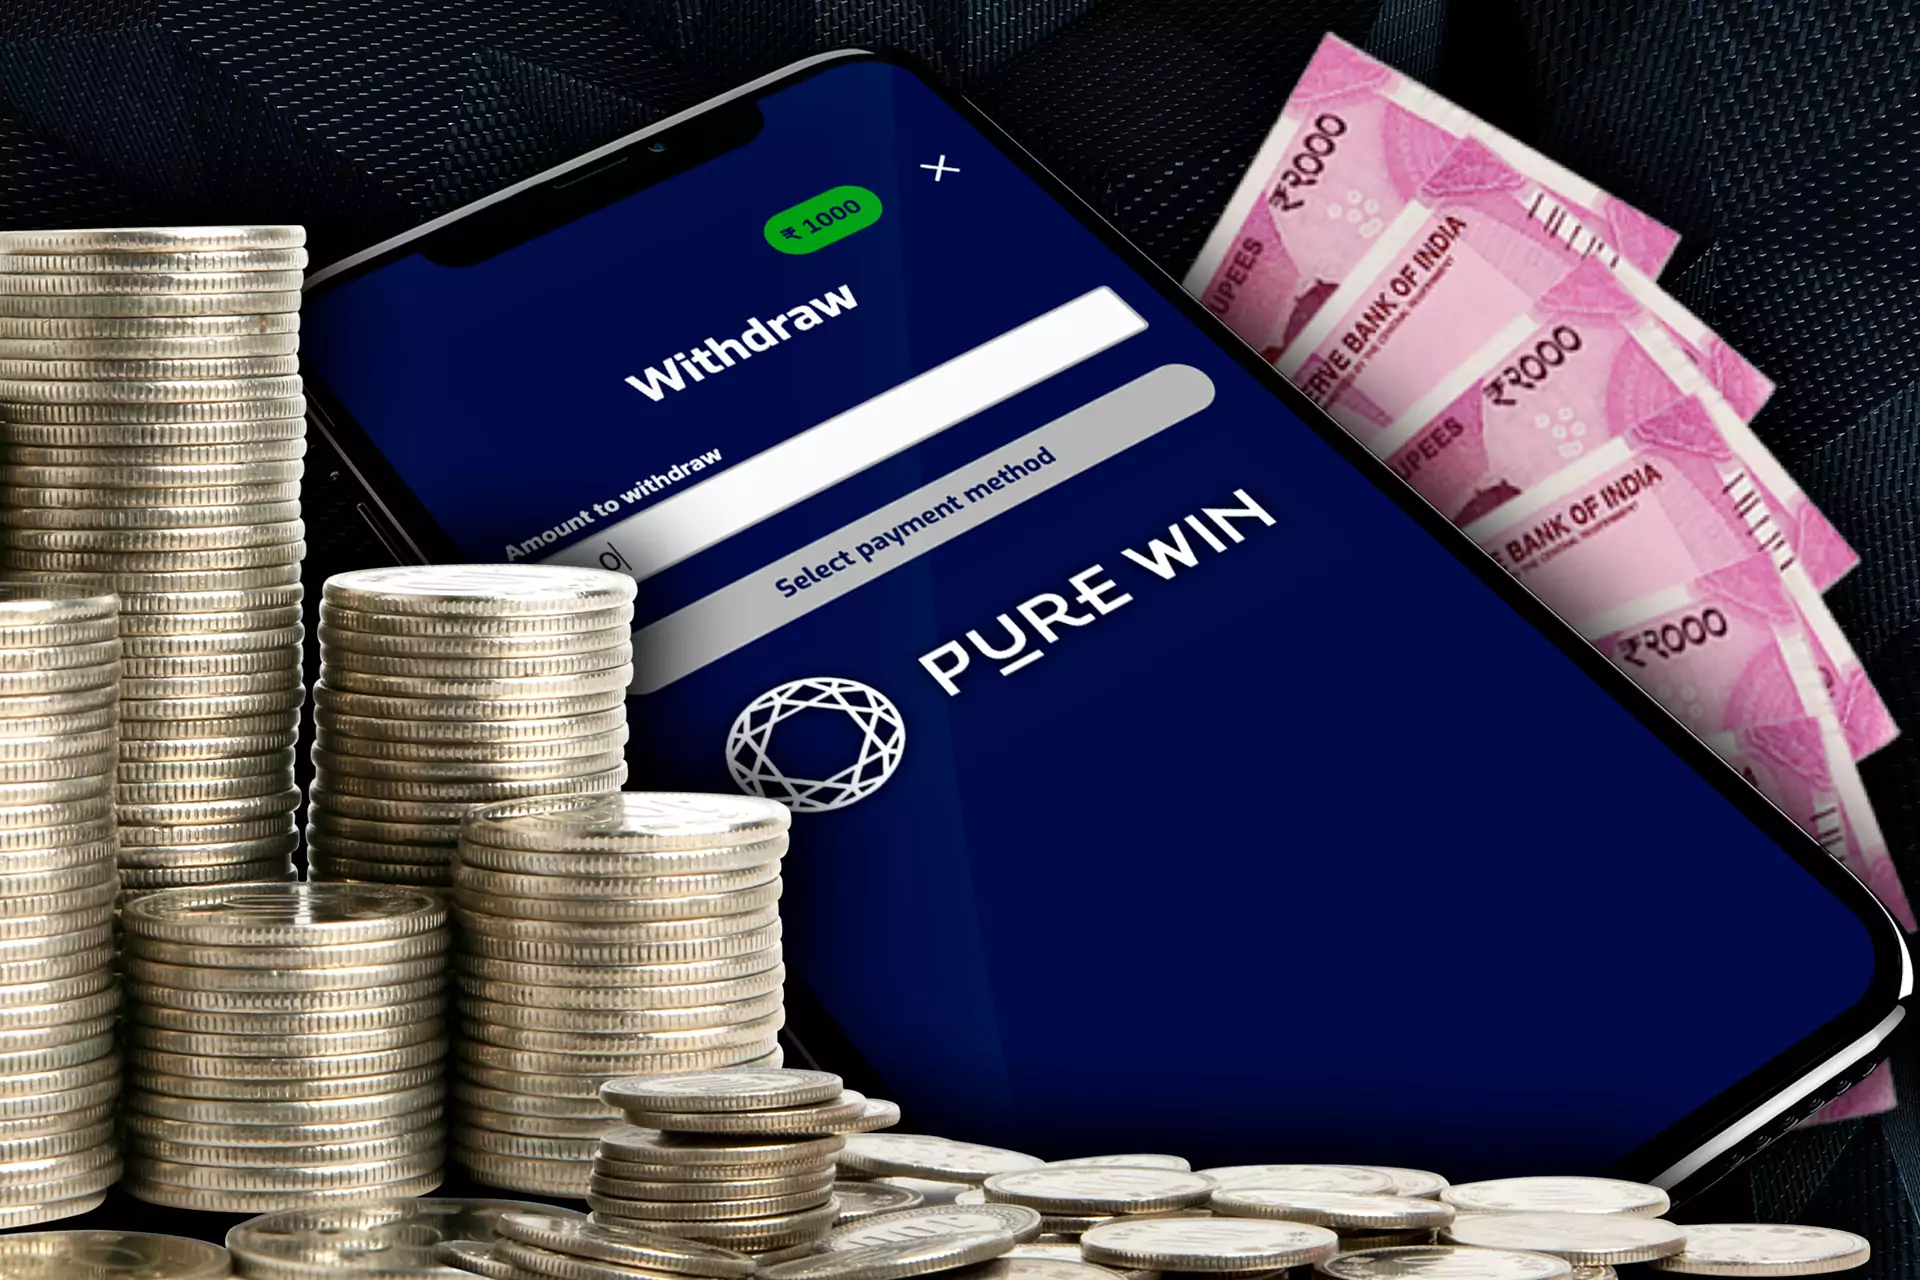 To withdraw from Pure Casino, you must use your personal account.